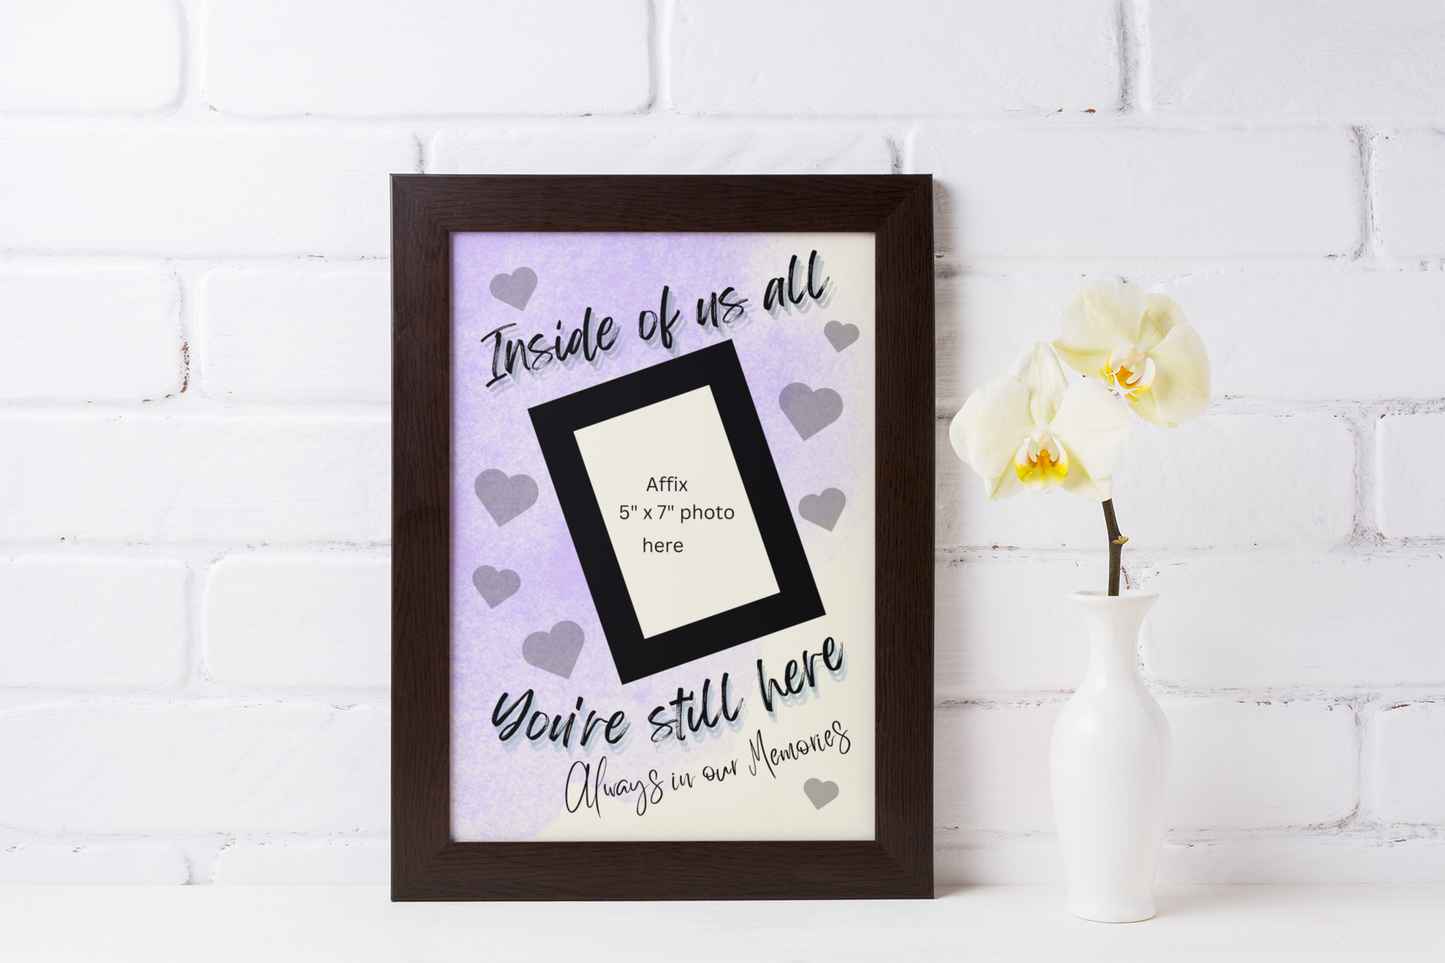 MEMORY of a LOVED ONE - QUIRKY UNIQUE WALL ART in PURPLE tones, featuring heartfelt words of love to remember them always.